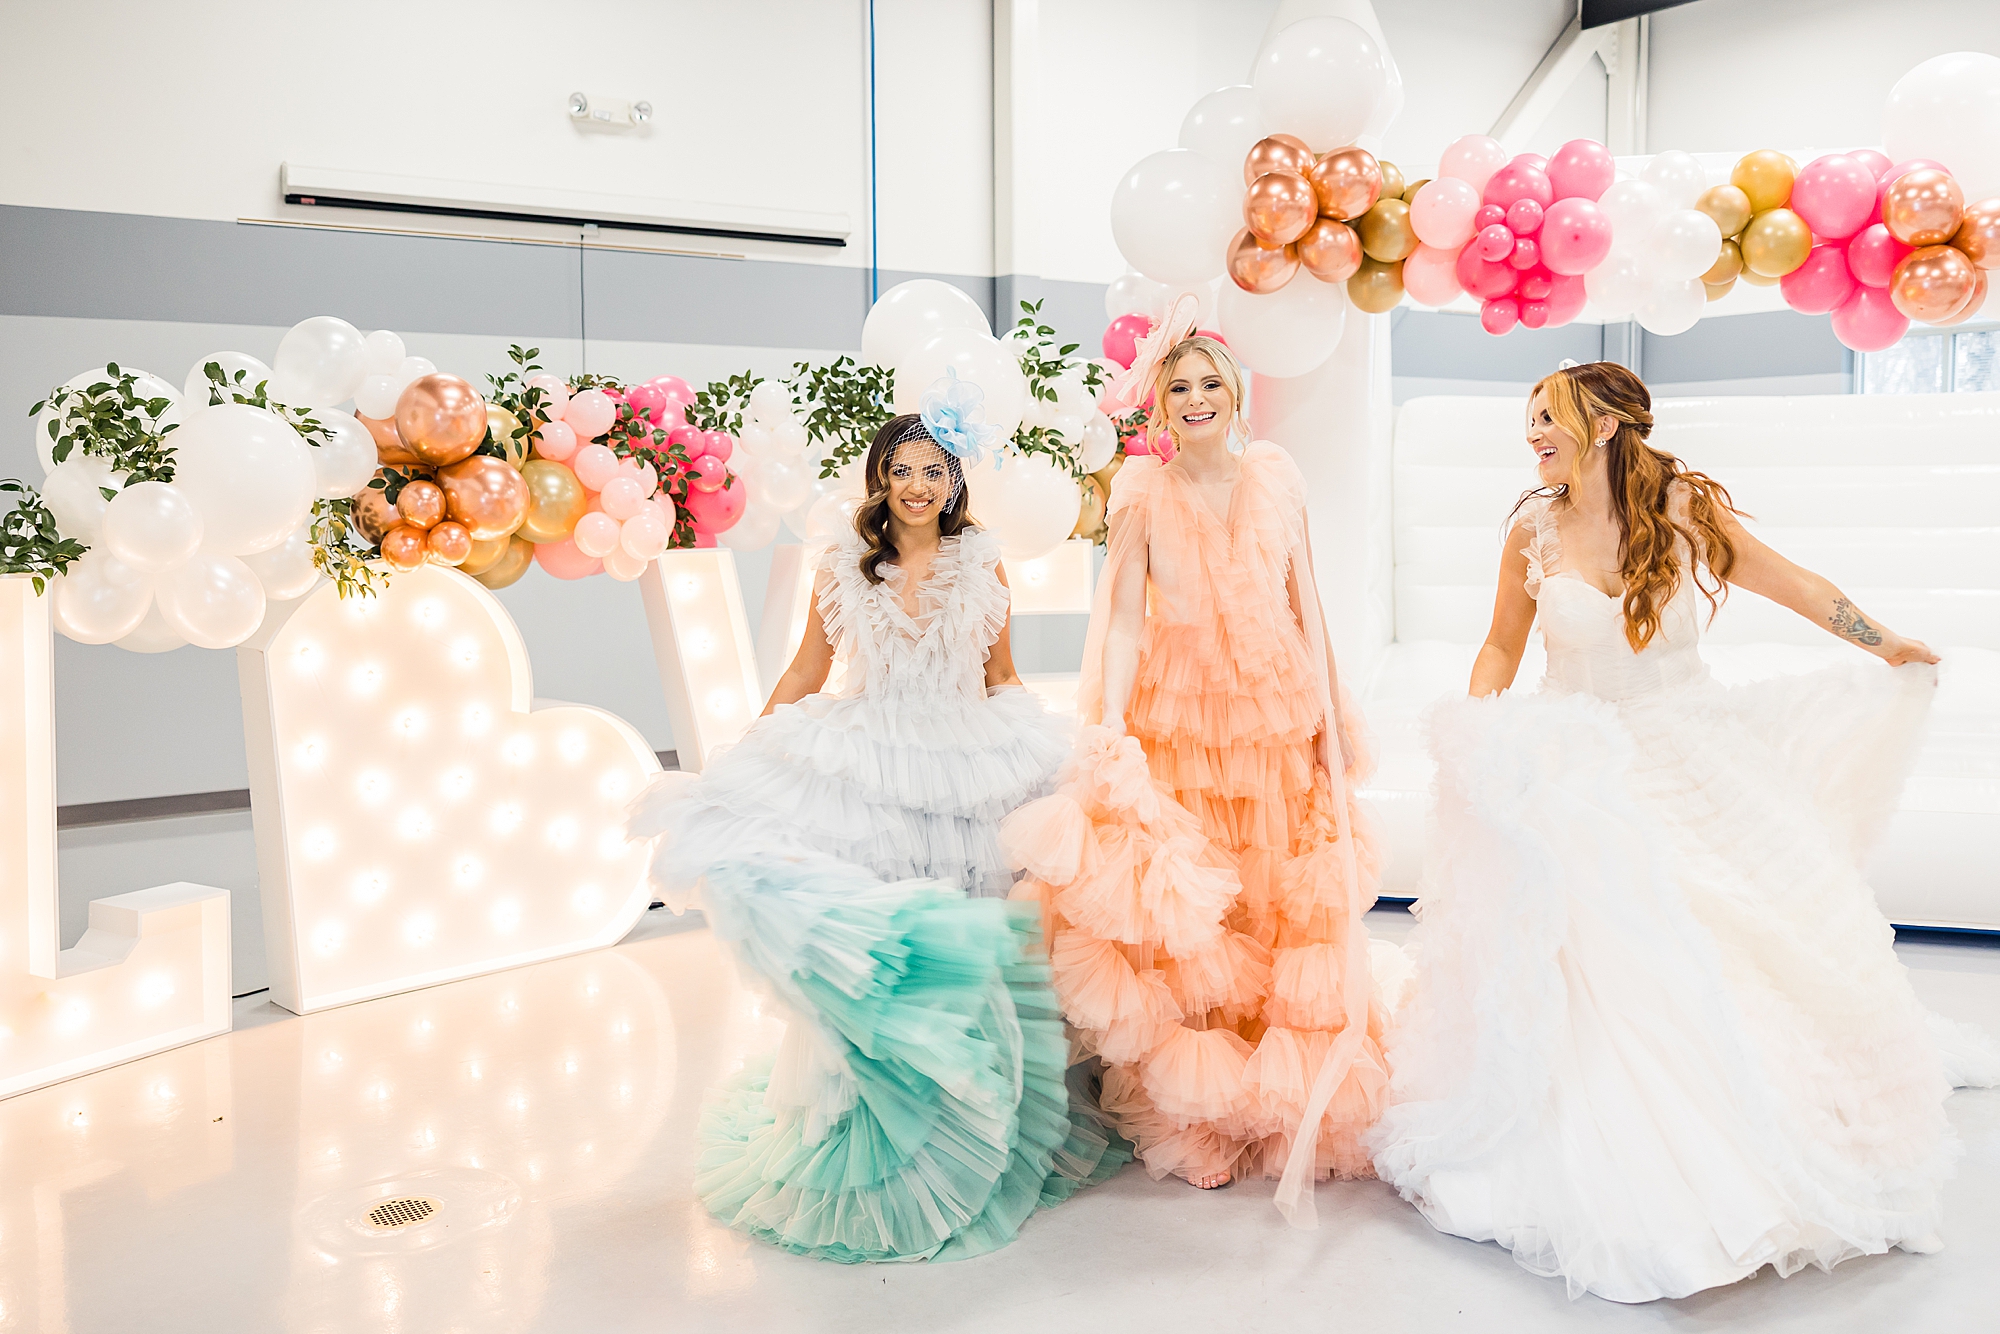 brides twirl gowns by bright LOVE letters